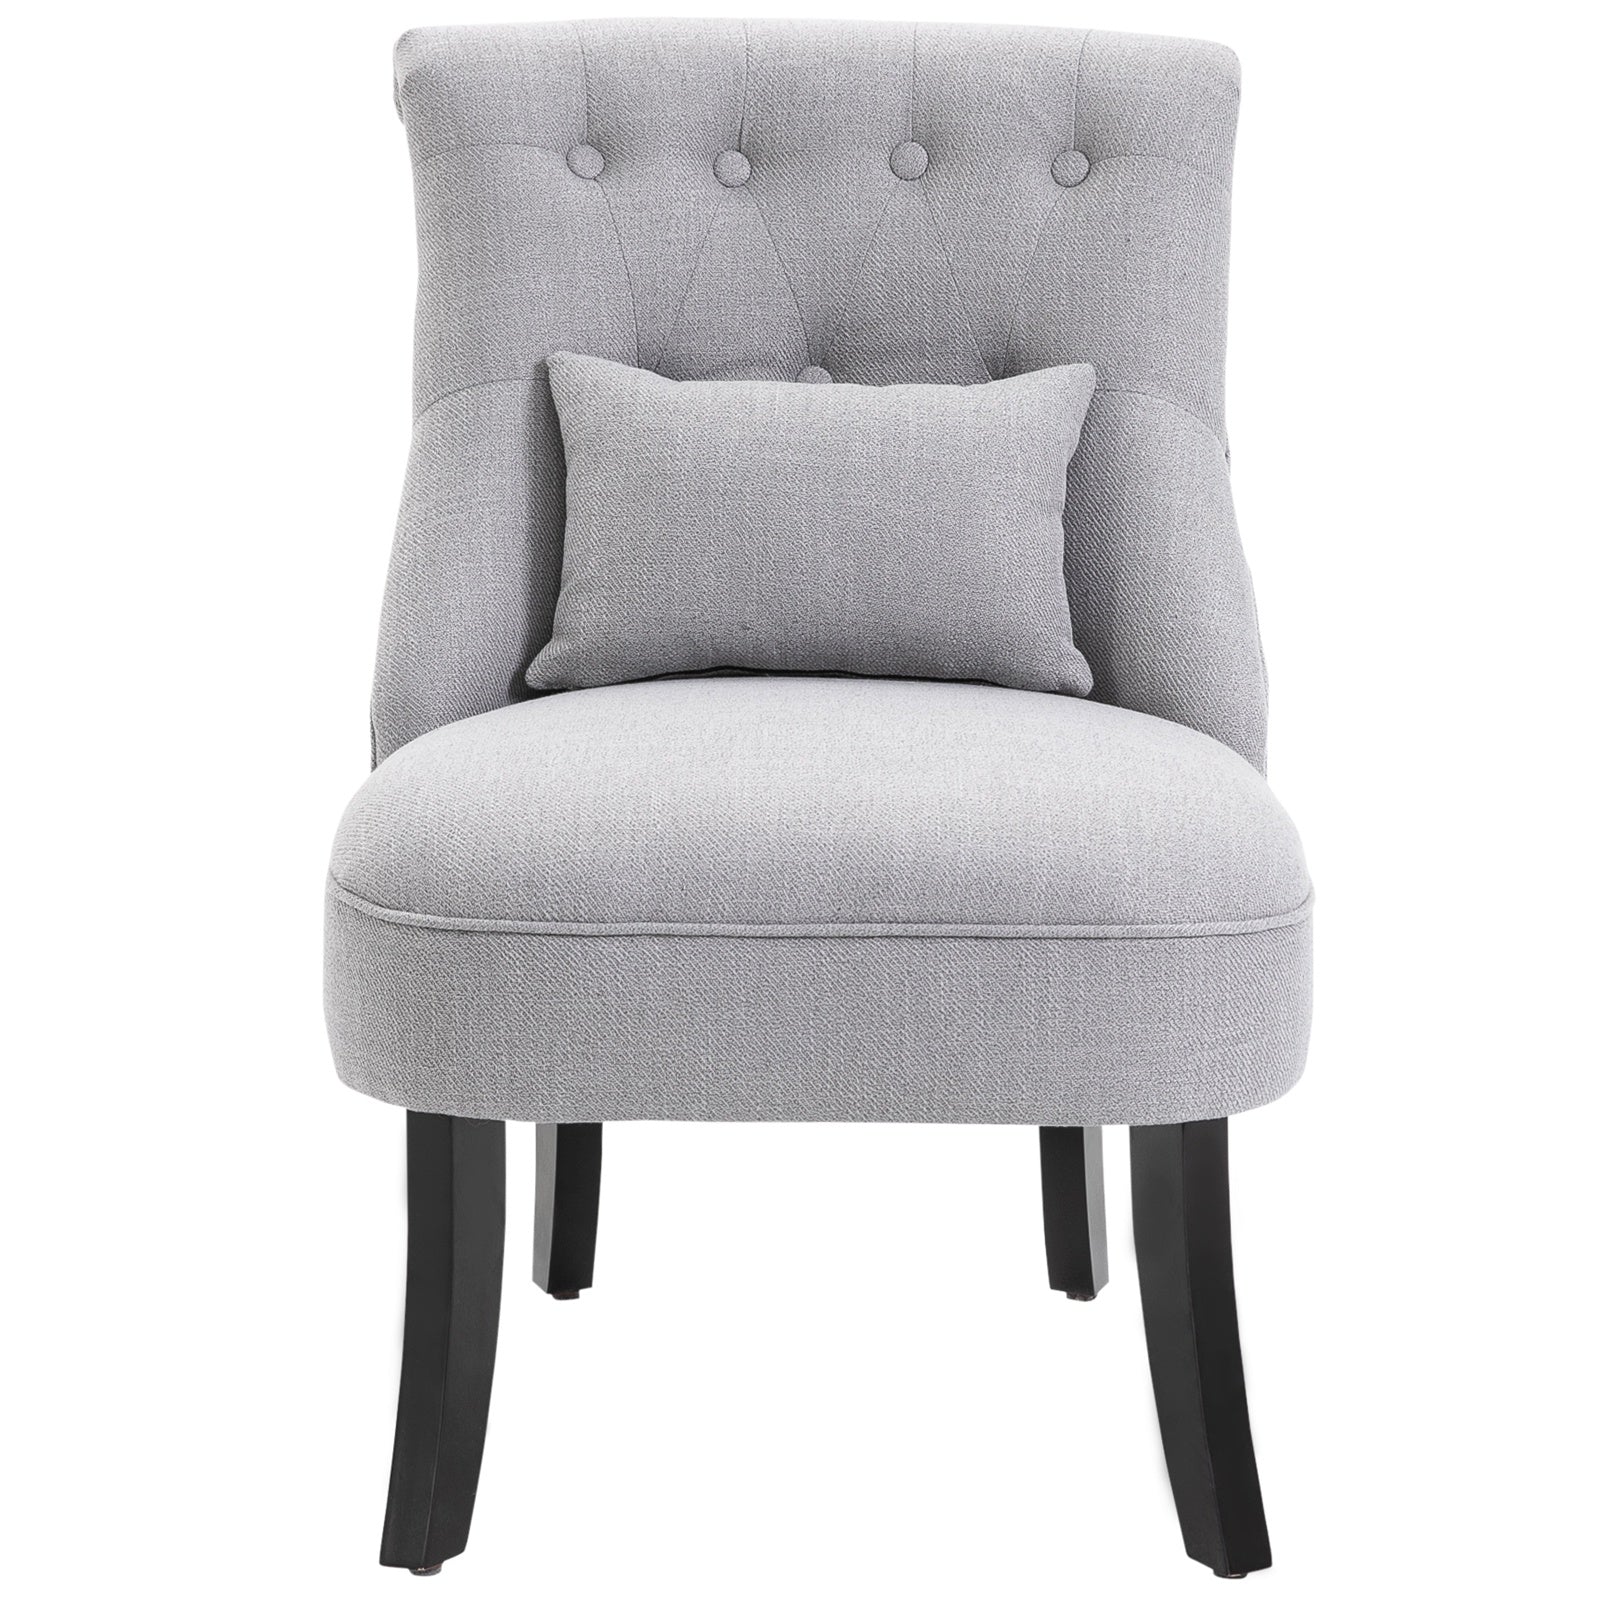 Solid Rubber Wood Tufted Single Sofa Chair Lounge W/ Pillow - Grey